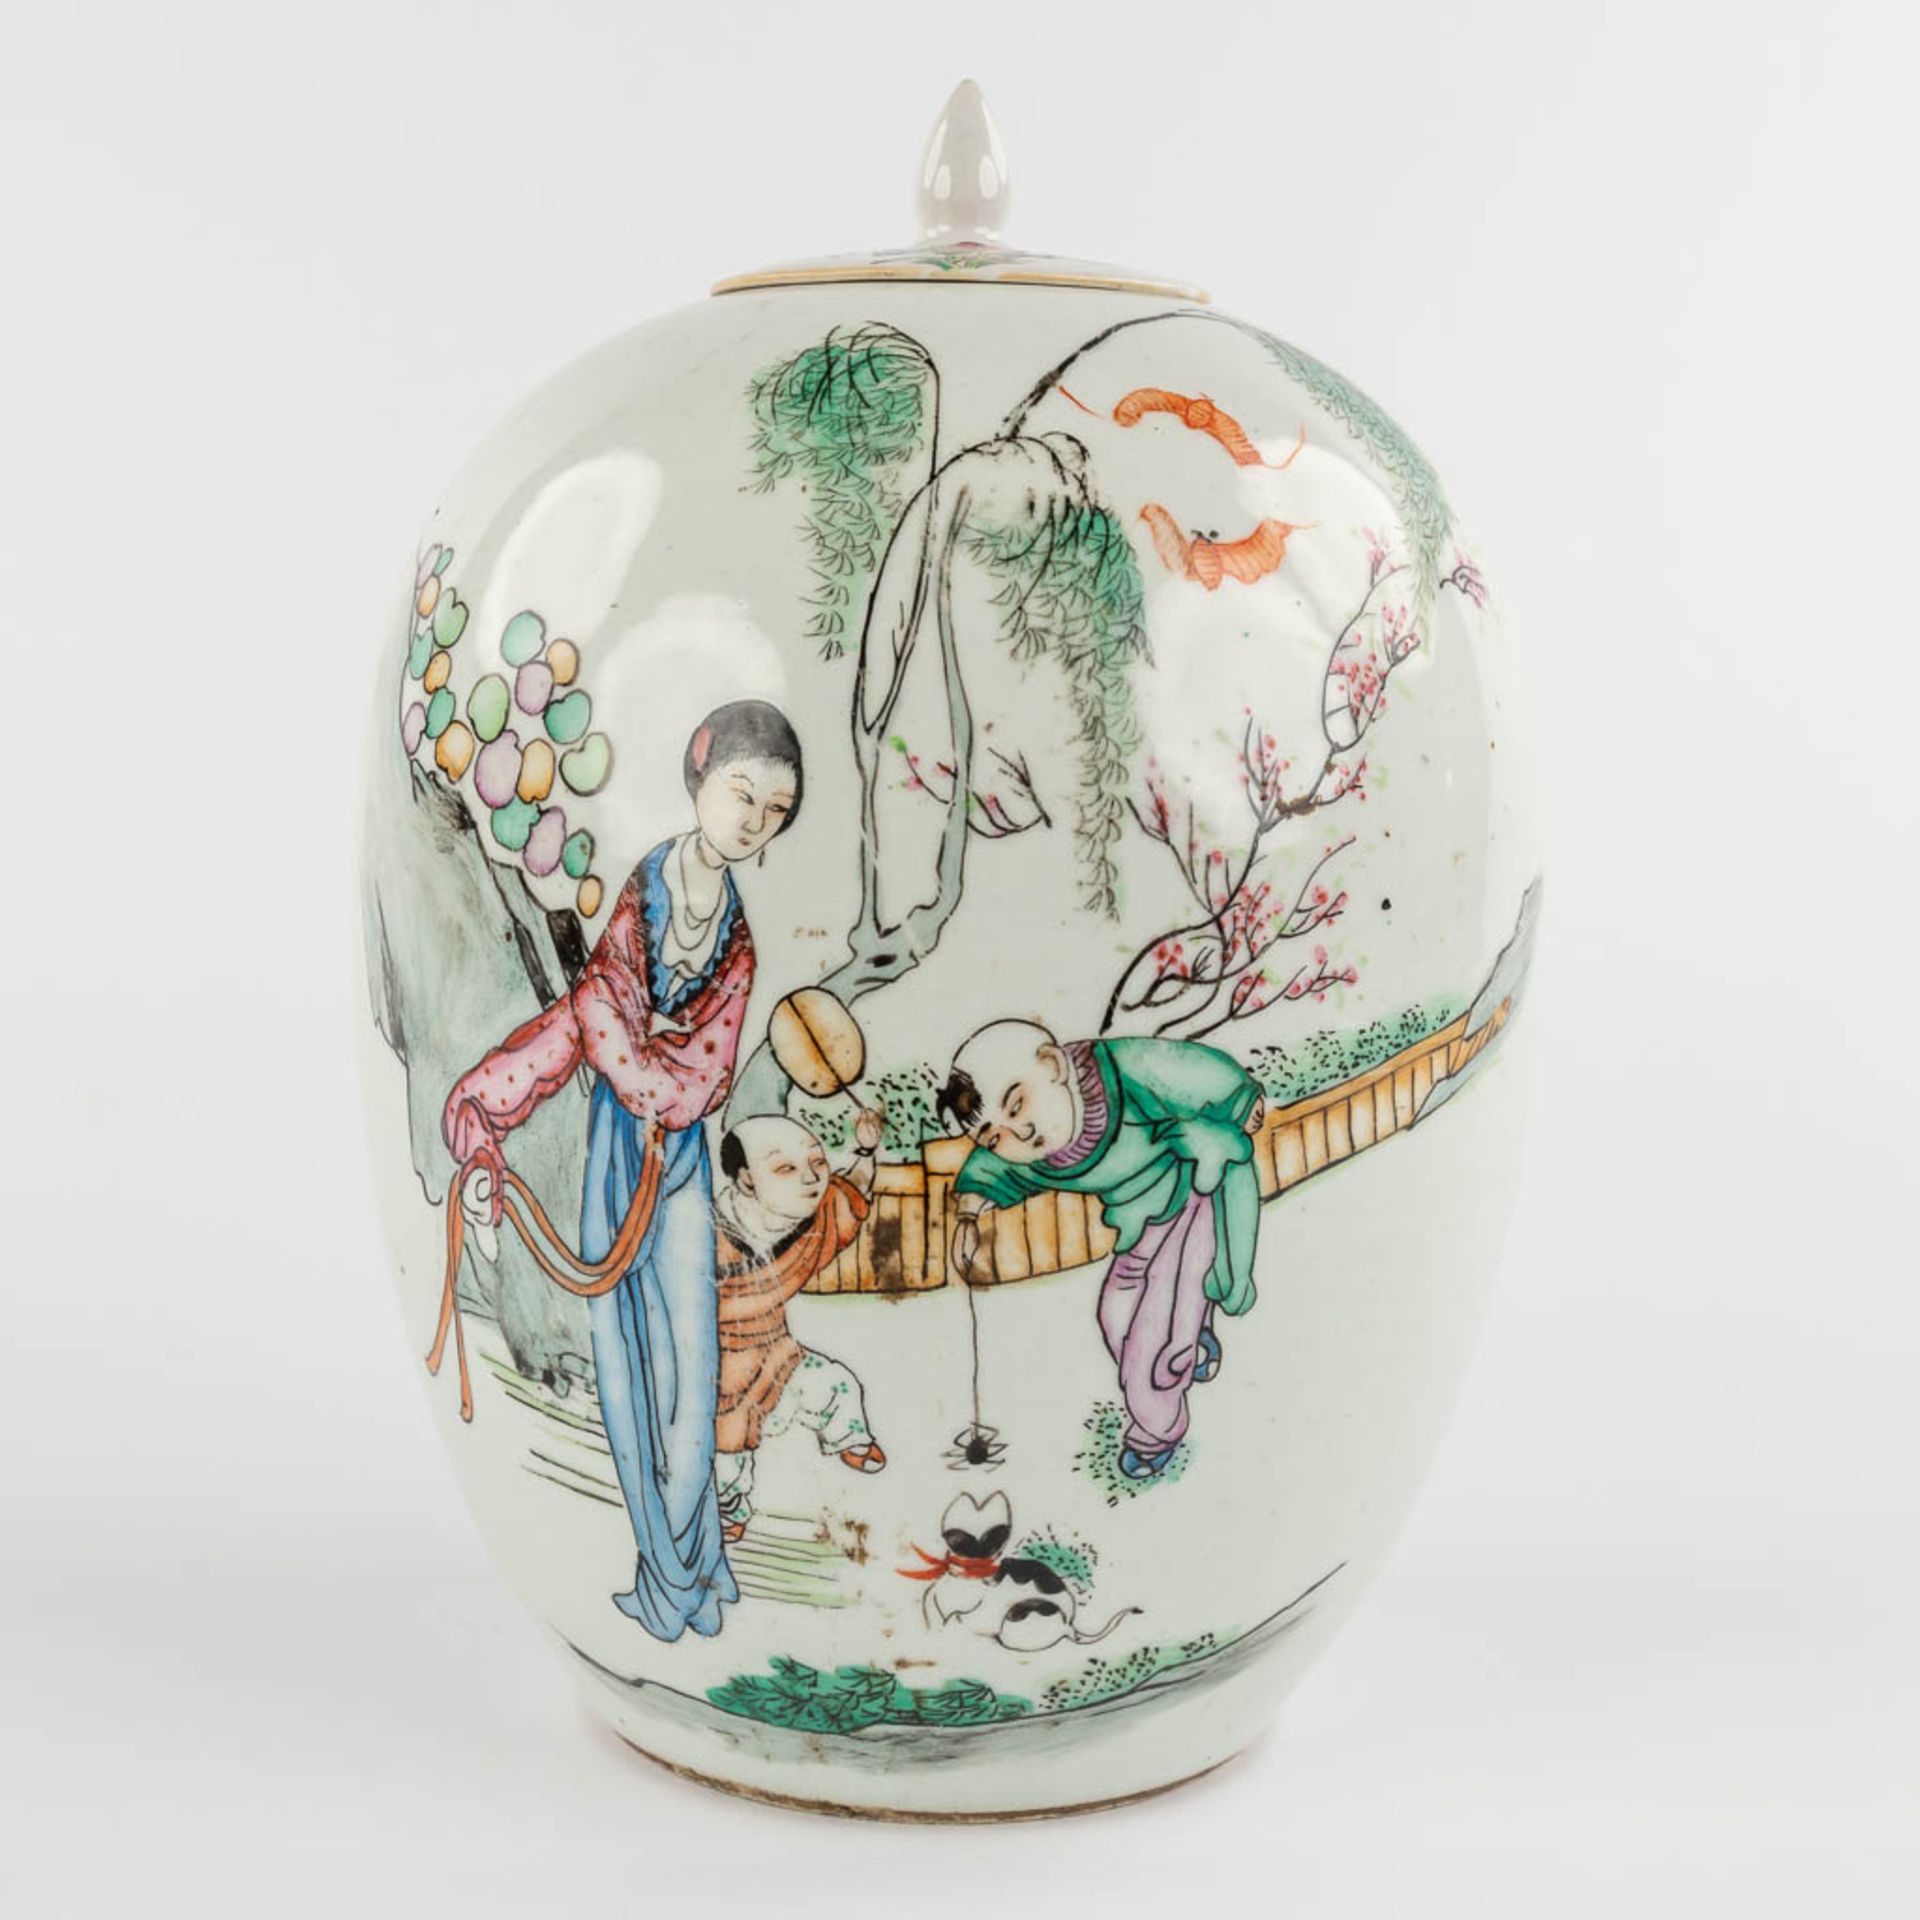 Two Chinese vases and a Ginger Jar, decorated with ladies. 19th/20th C. (H:57 x D:23 cm) - Image 22 of 31